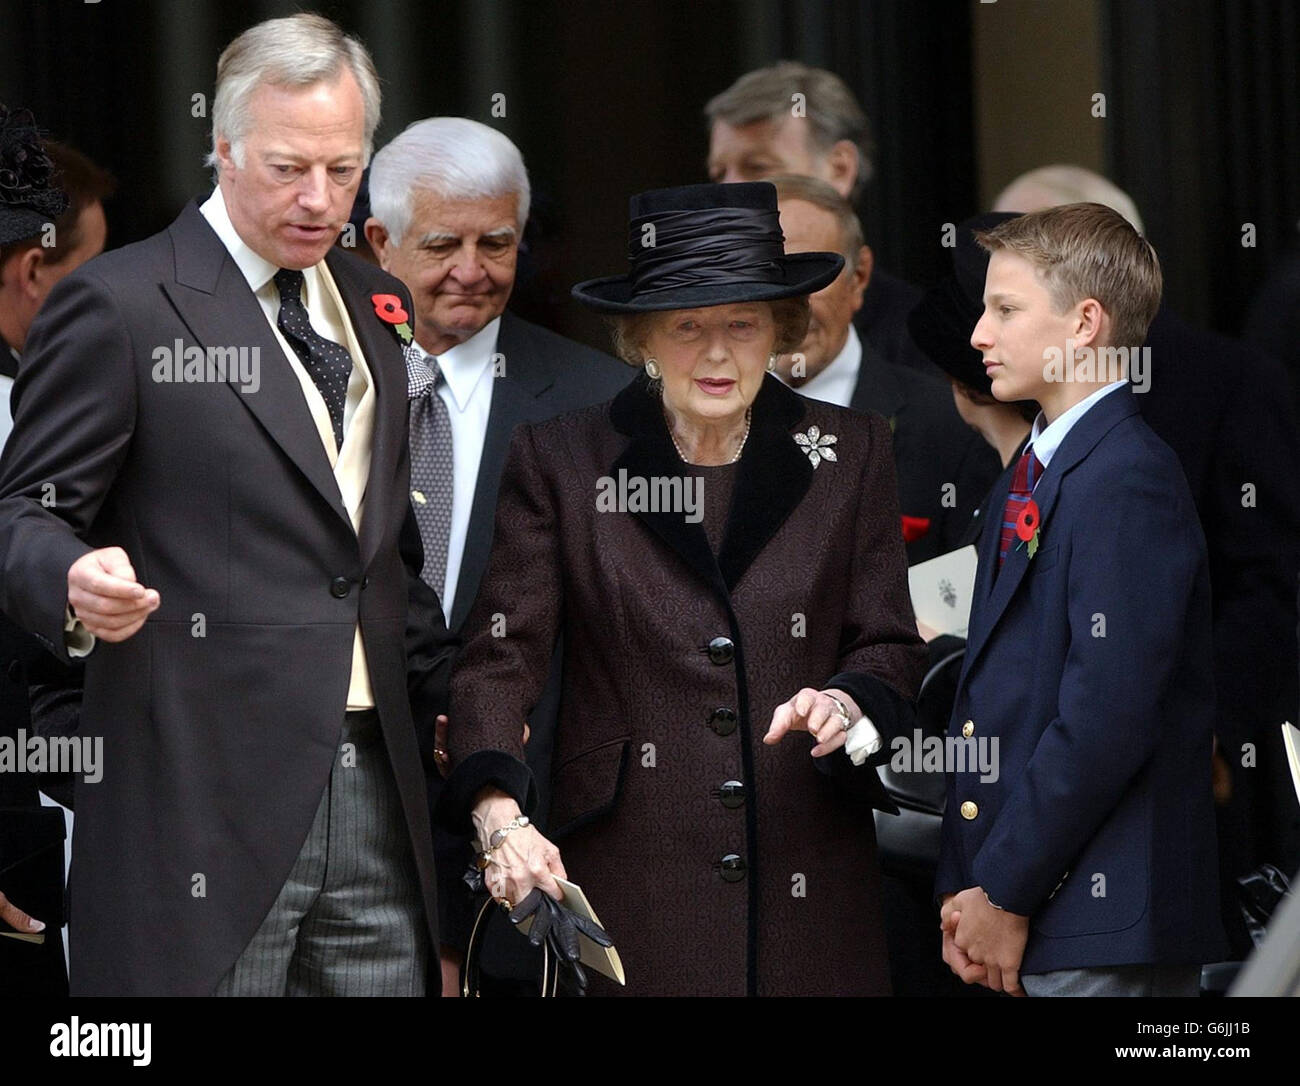 Former Prime Minister Lady Thatcher is comforted by her grandson Michael Thatcher and her son Mark outside the memorial service of her late husband, Sir Denis Thatcher, in The Guards Chapel, Birdcage Walk, London. Sir Denis died in June, aged 88 having undergone major heart surgery some six months earlier, from which it was thought he had made a good recovery. Stock Photo